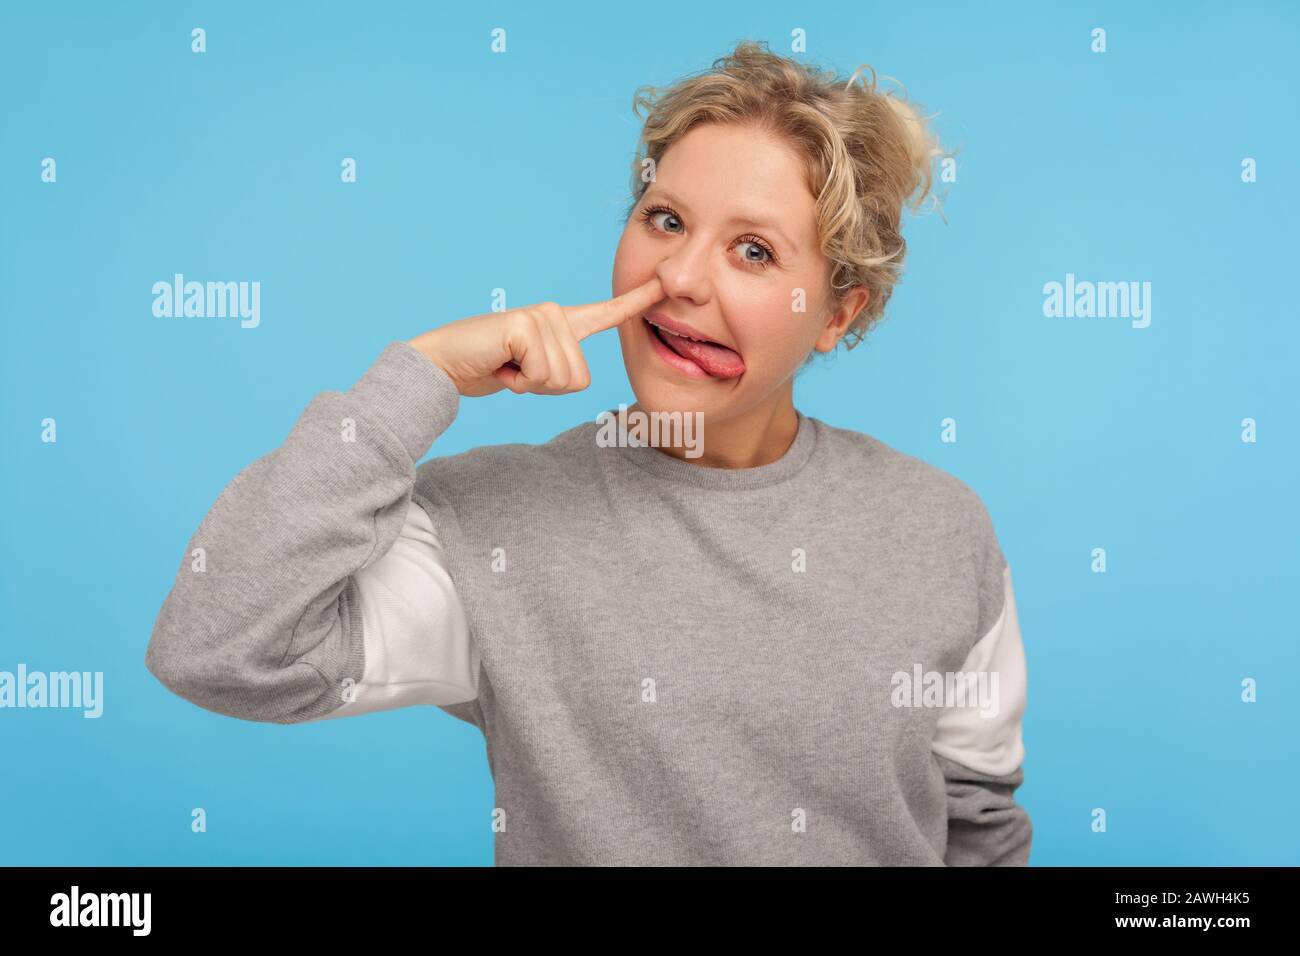 Funny cheerful woman with short hair in casual sweatshirt picking nose with stupid silly face, pulling out boogers, bad manners concept, misconduct . Stock Photo